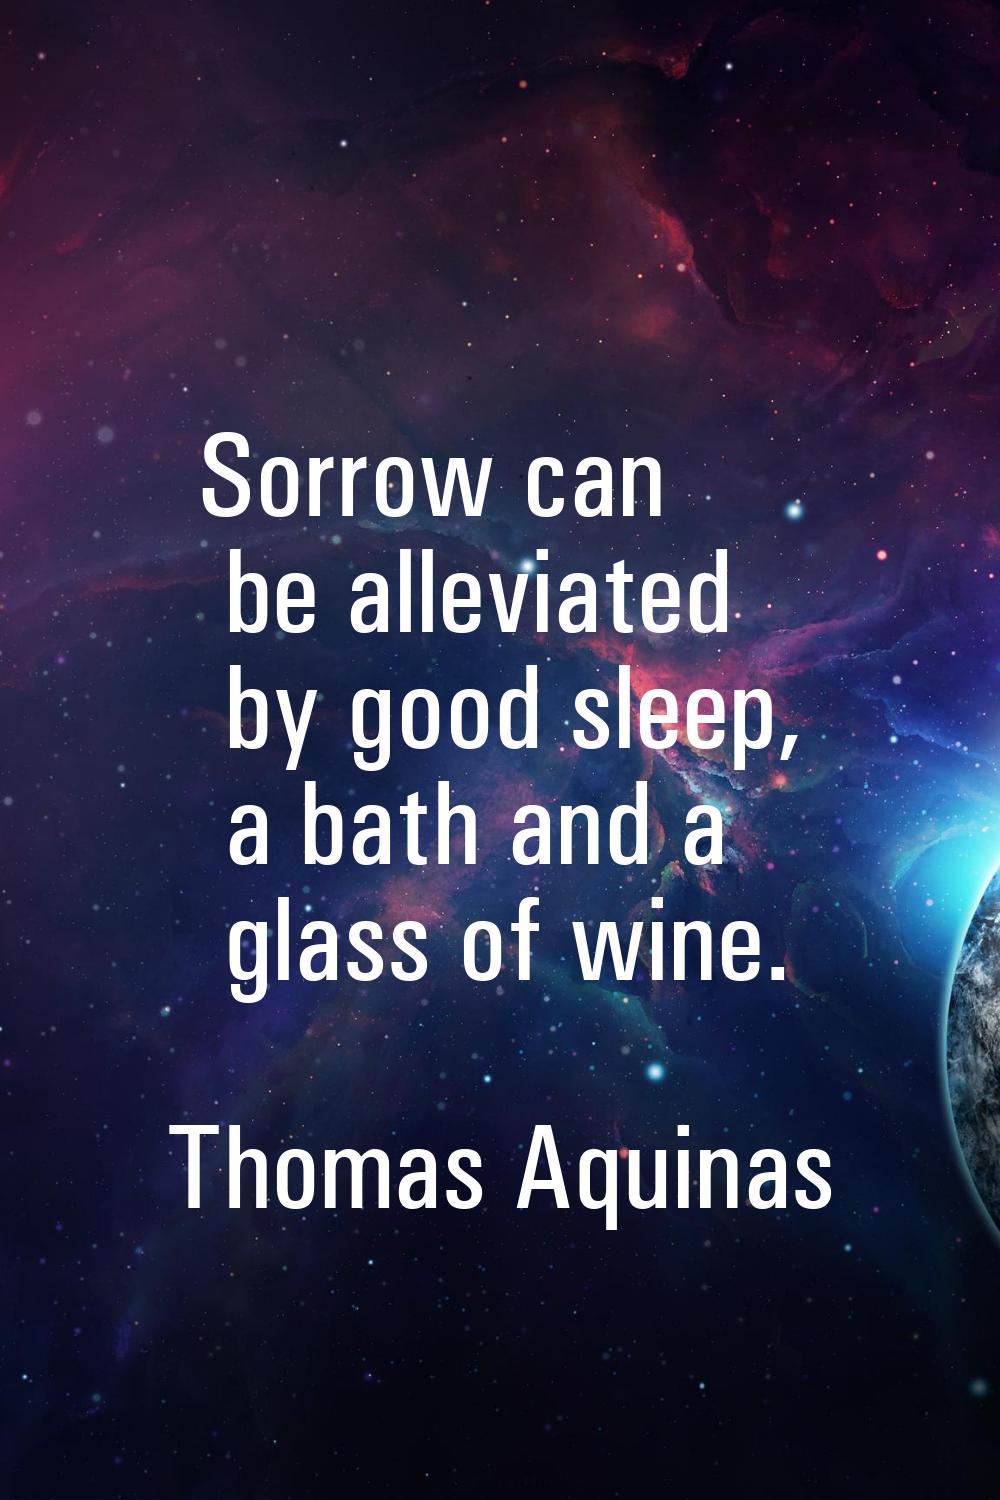 Sorrow can be alleviated by good sleep, a bath and a glass of wine.